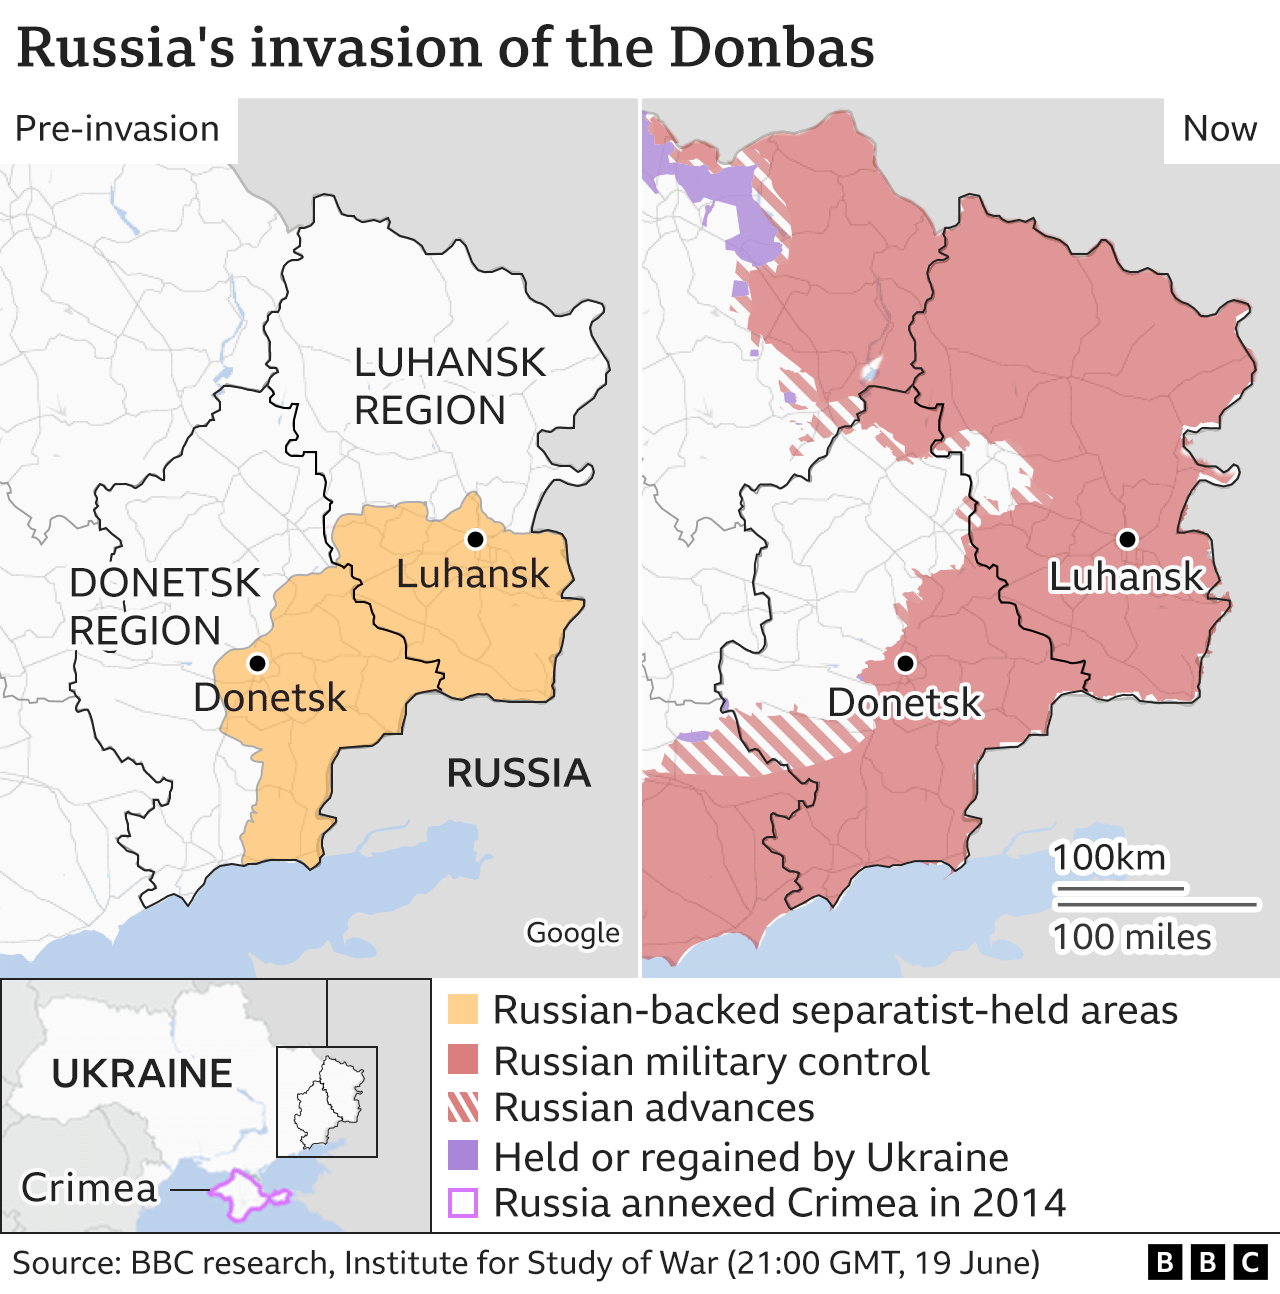 https://ichef.bbci.co.uk/news/976/cpsprodpb/4154/production/_125542761_donbas_control_then_now_19_06_2x640-nc.png